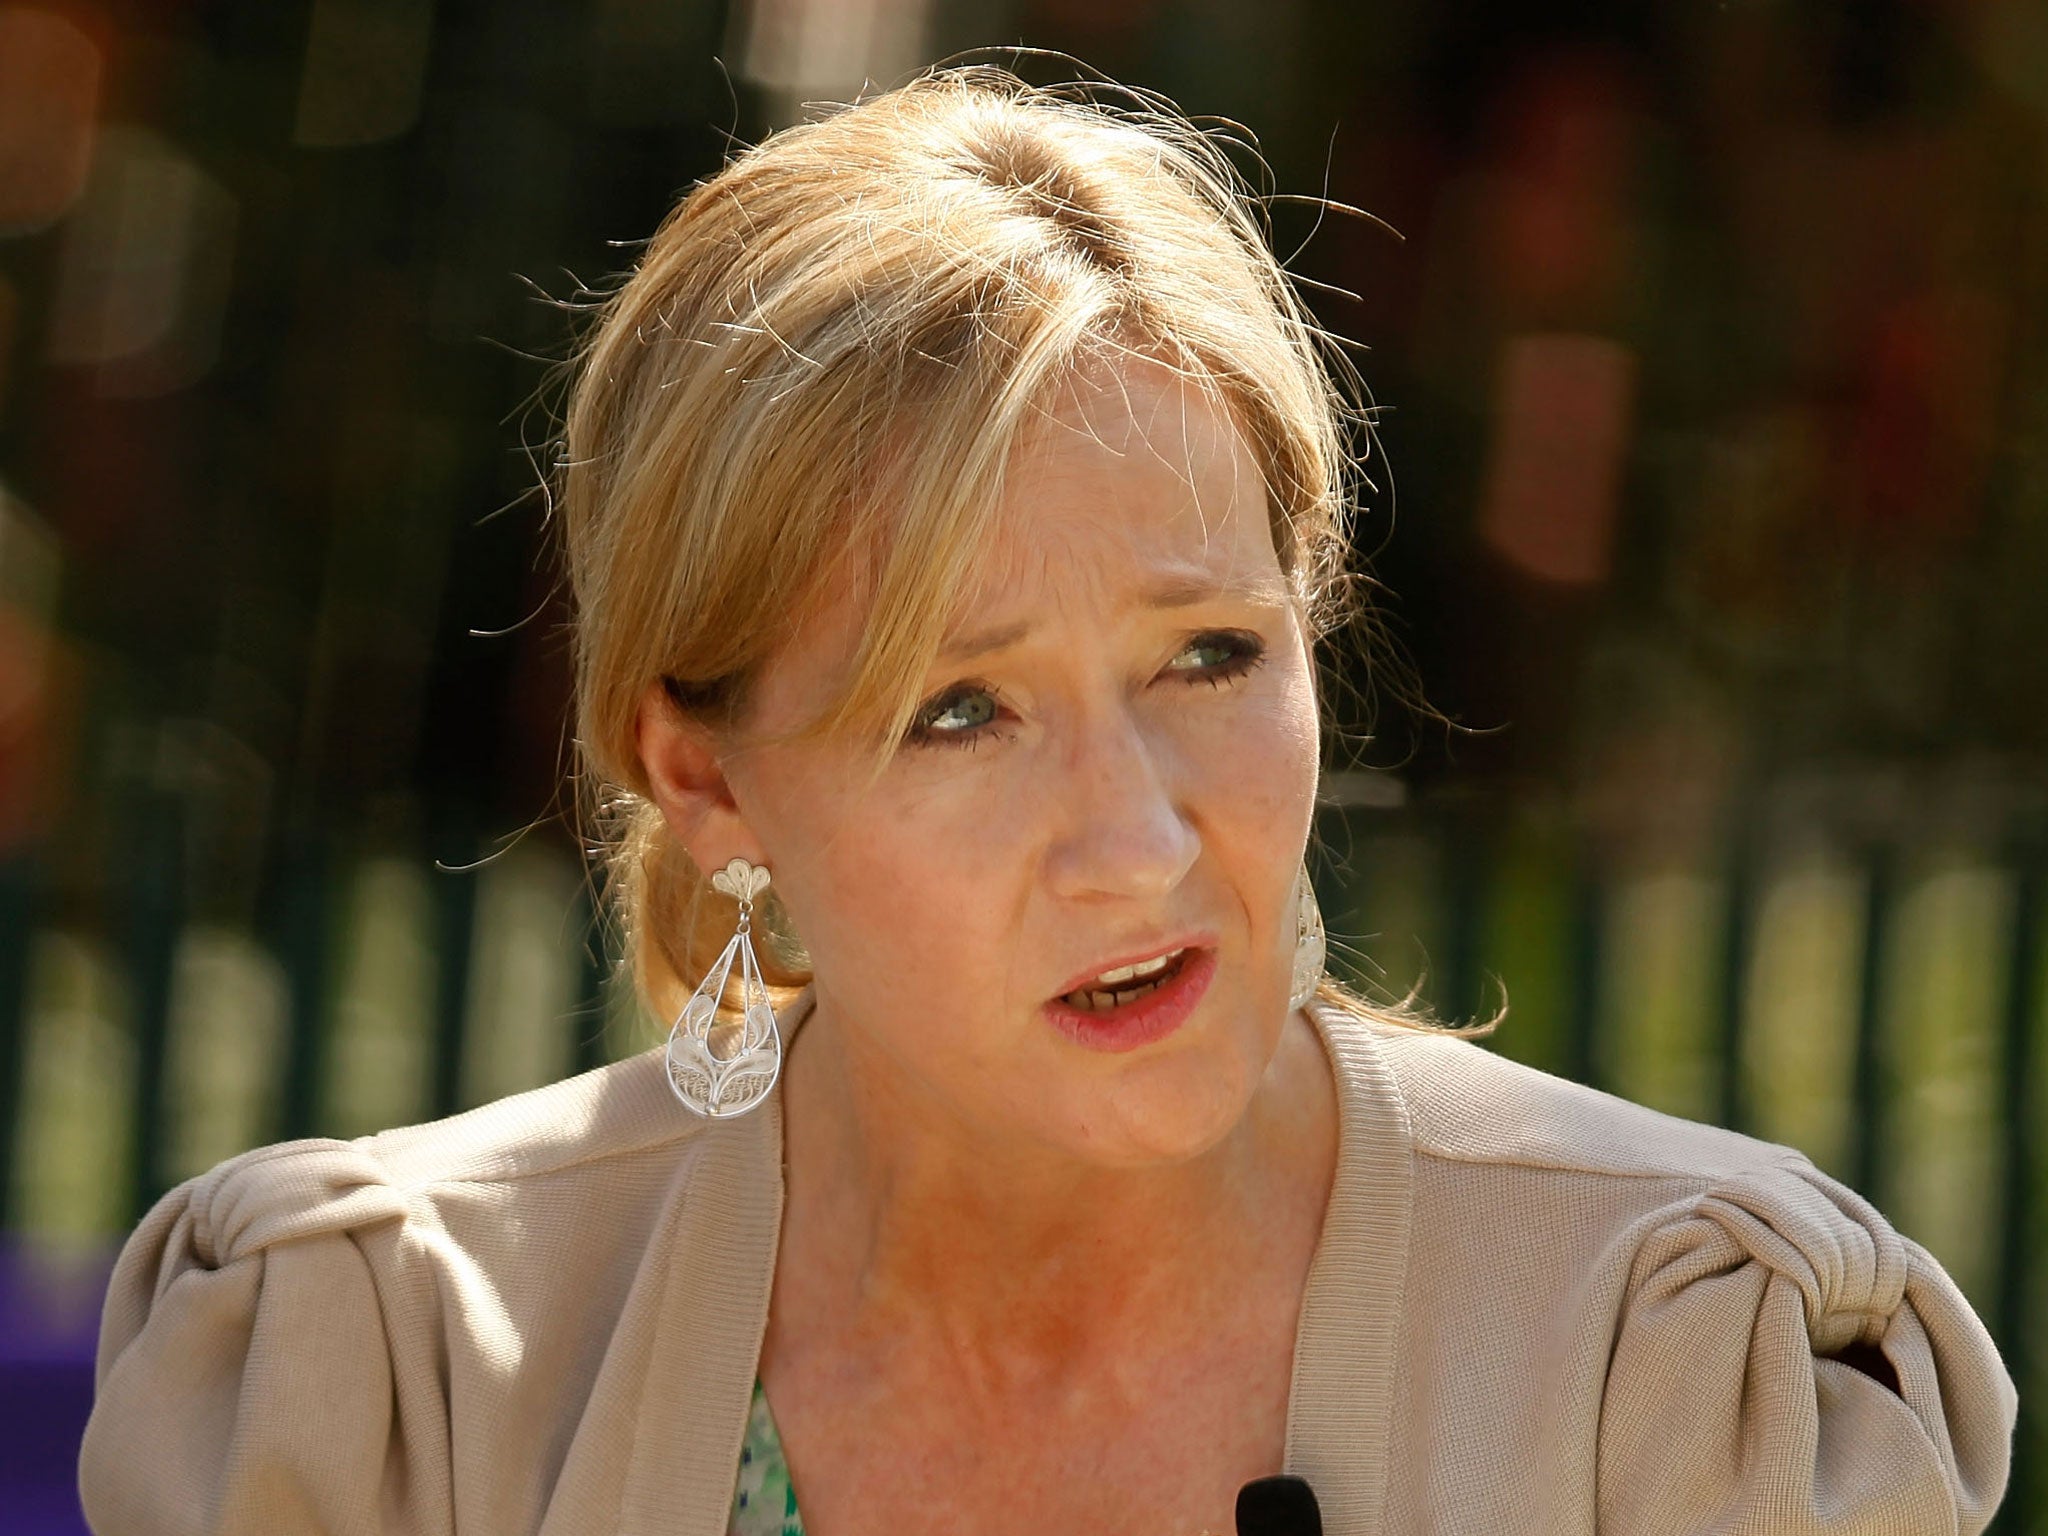 JK Rowling is suing the Daily Mail for libel.